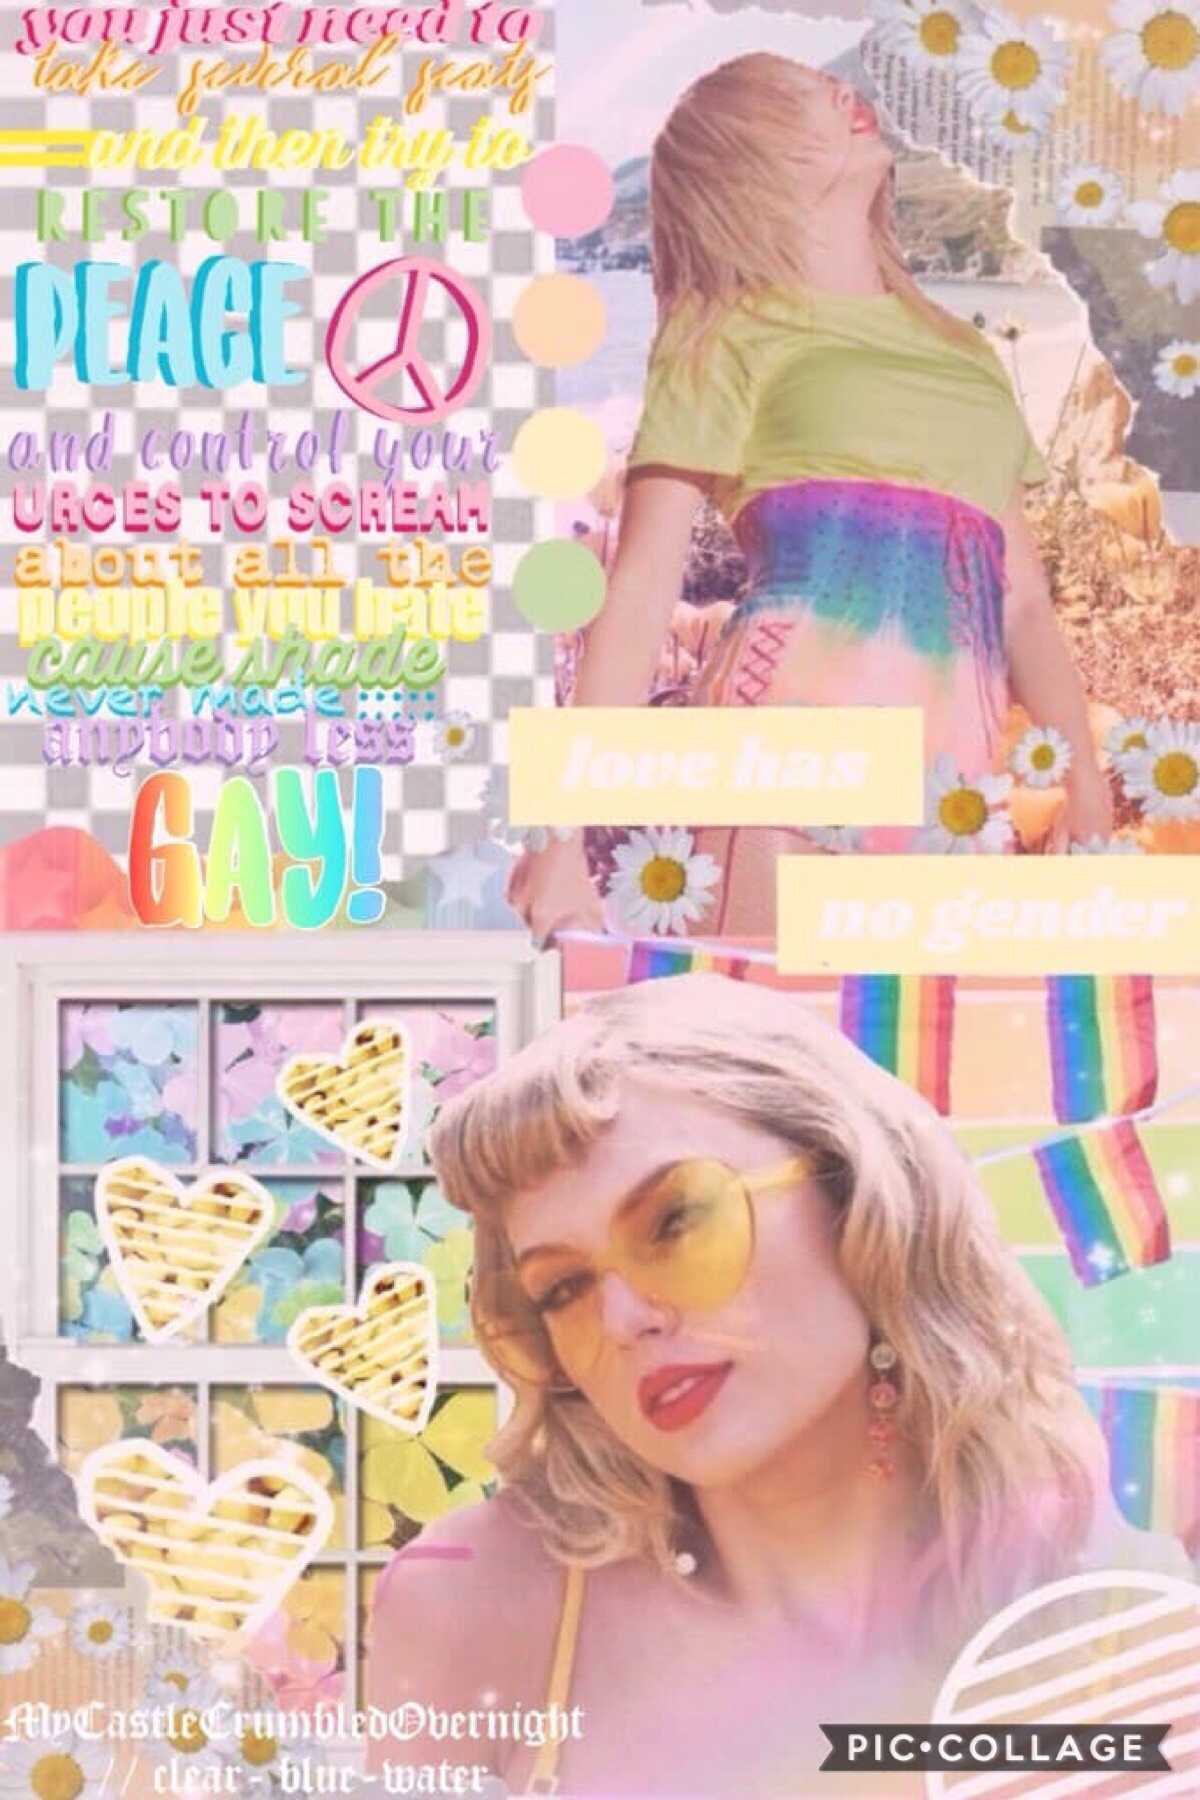 🌈T A P🌈
Happy Pride Month! This is a collab with the fabulous MyCastleCrumbledOvernight who did the incredible text!
QOTD: What was you favorite outfit of the You Need To Calm Down MV?
AOTD: The happy meal or the yellow swimsuit 